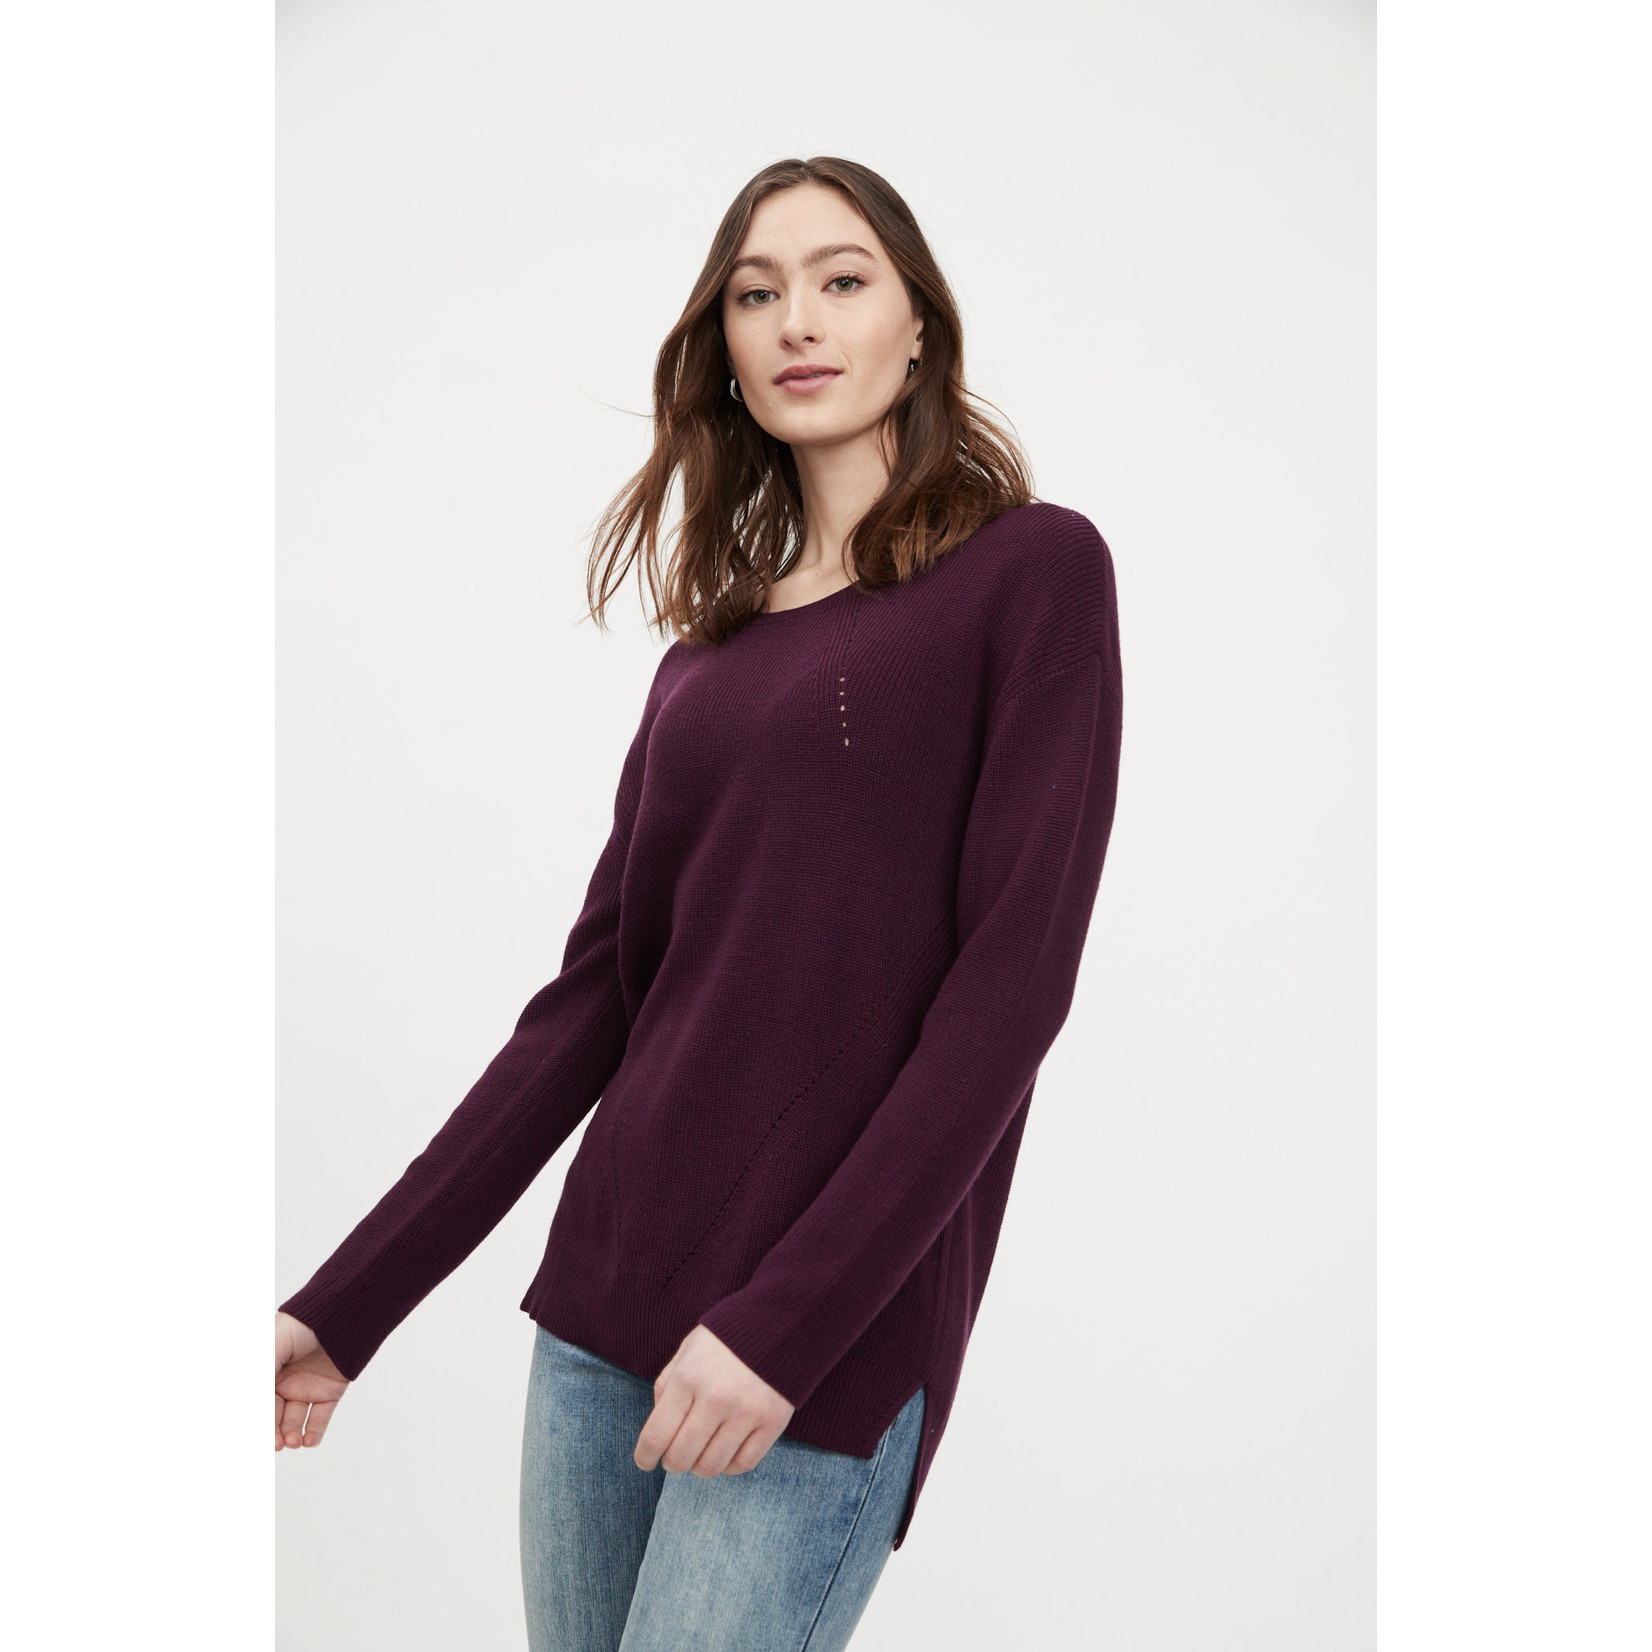 FDJ Long Sleeve Boatneck Sweater 1264624 (More Colors)